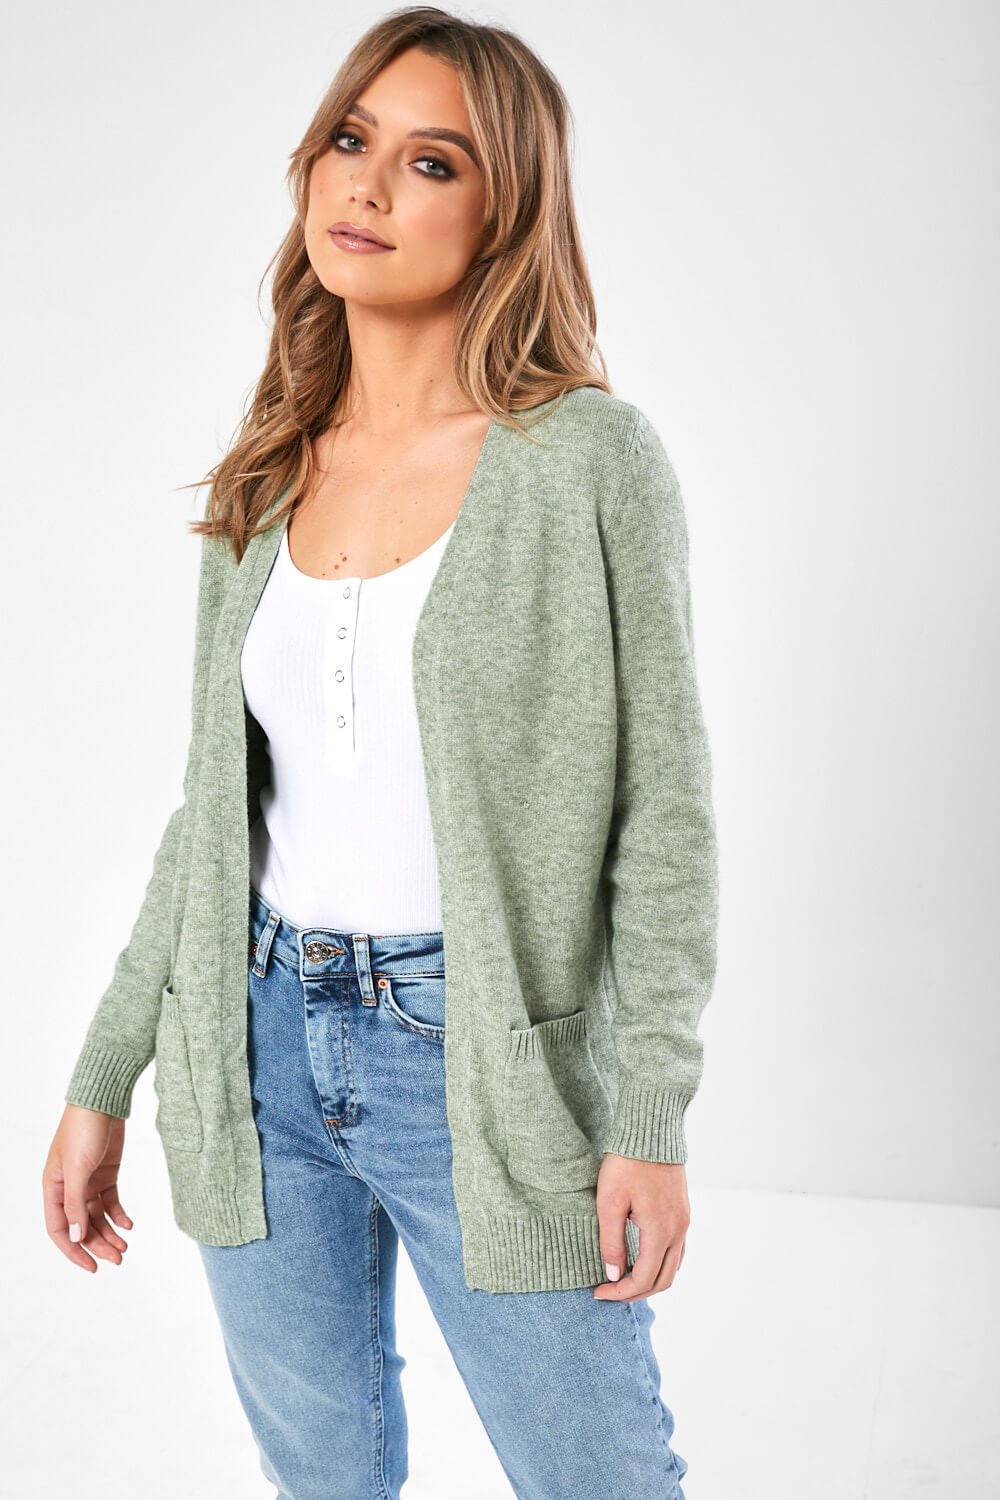 Only Lesly Cardigan in Sage | iCLOTHING - iCLOTHING